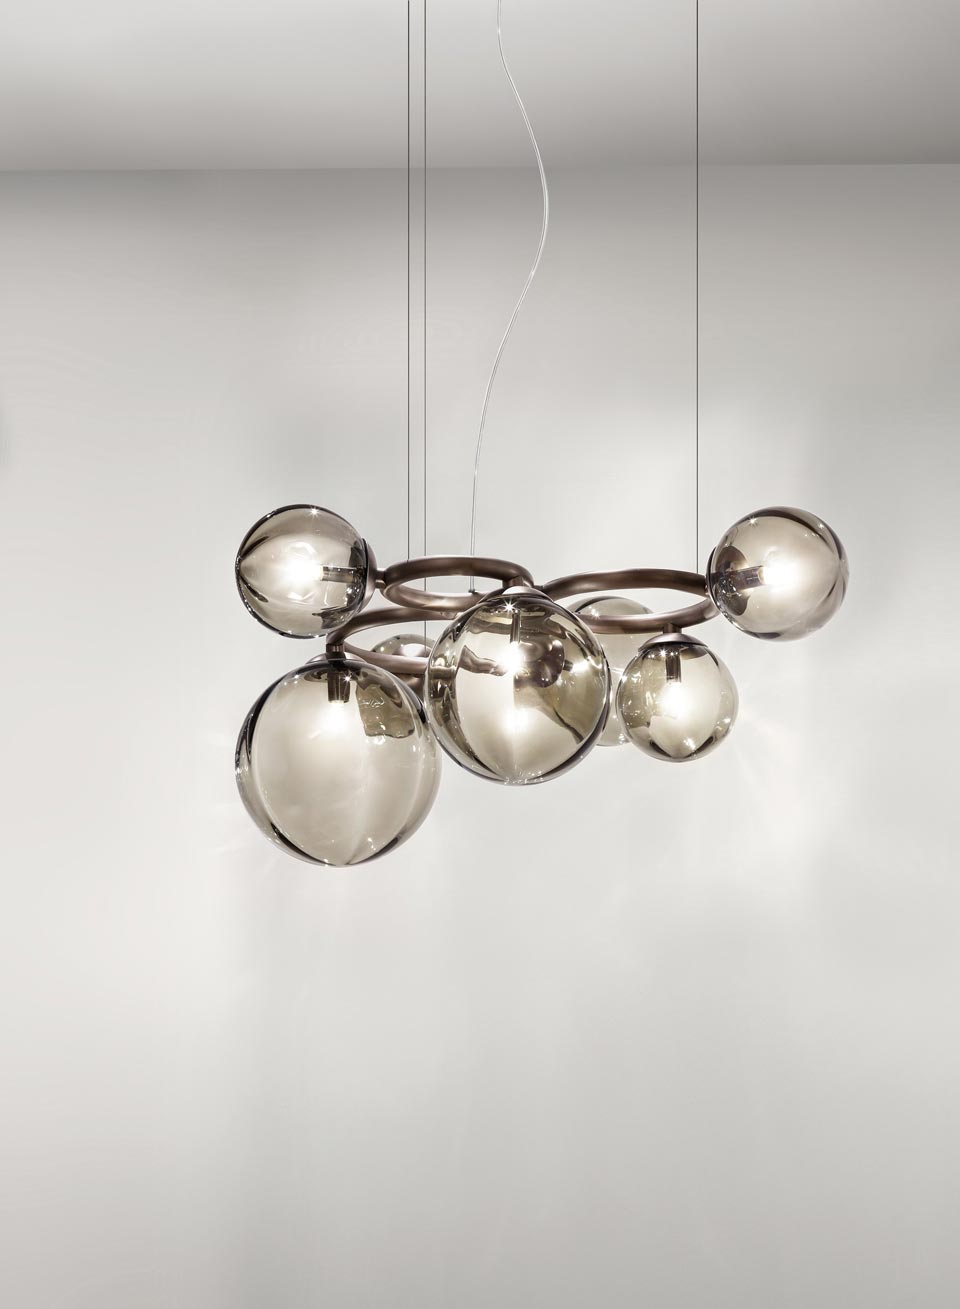 pendant-puppet-suspension-spheres-of-smoked-glass-20020035R